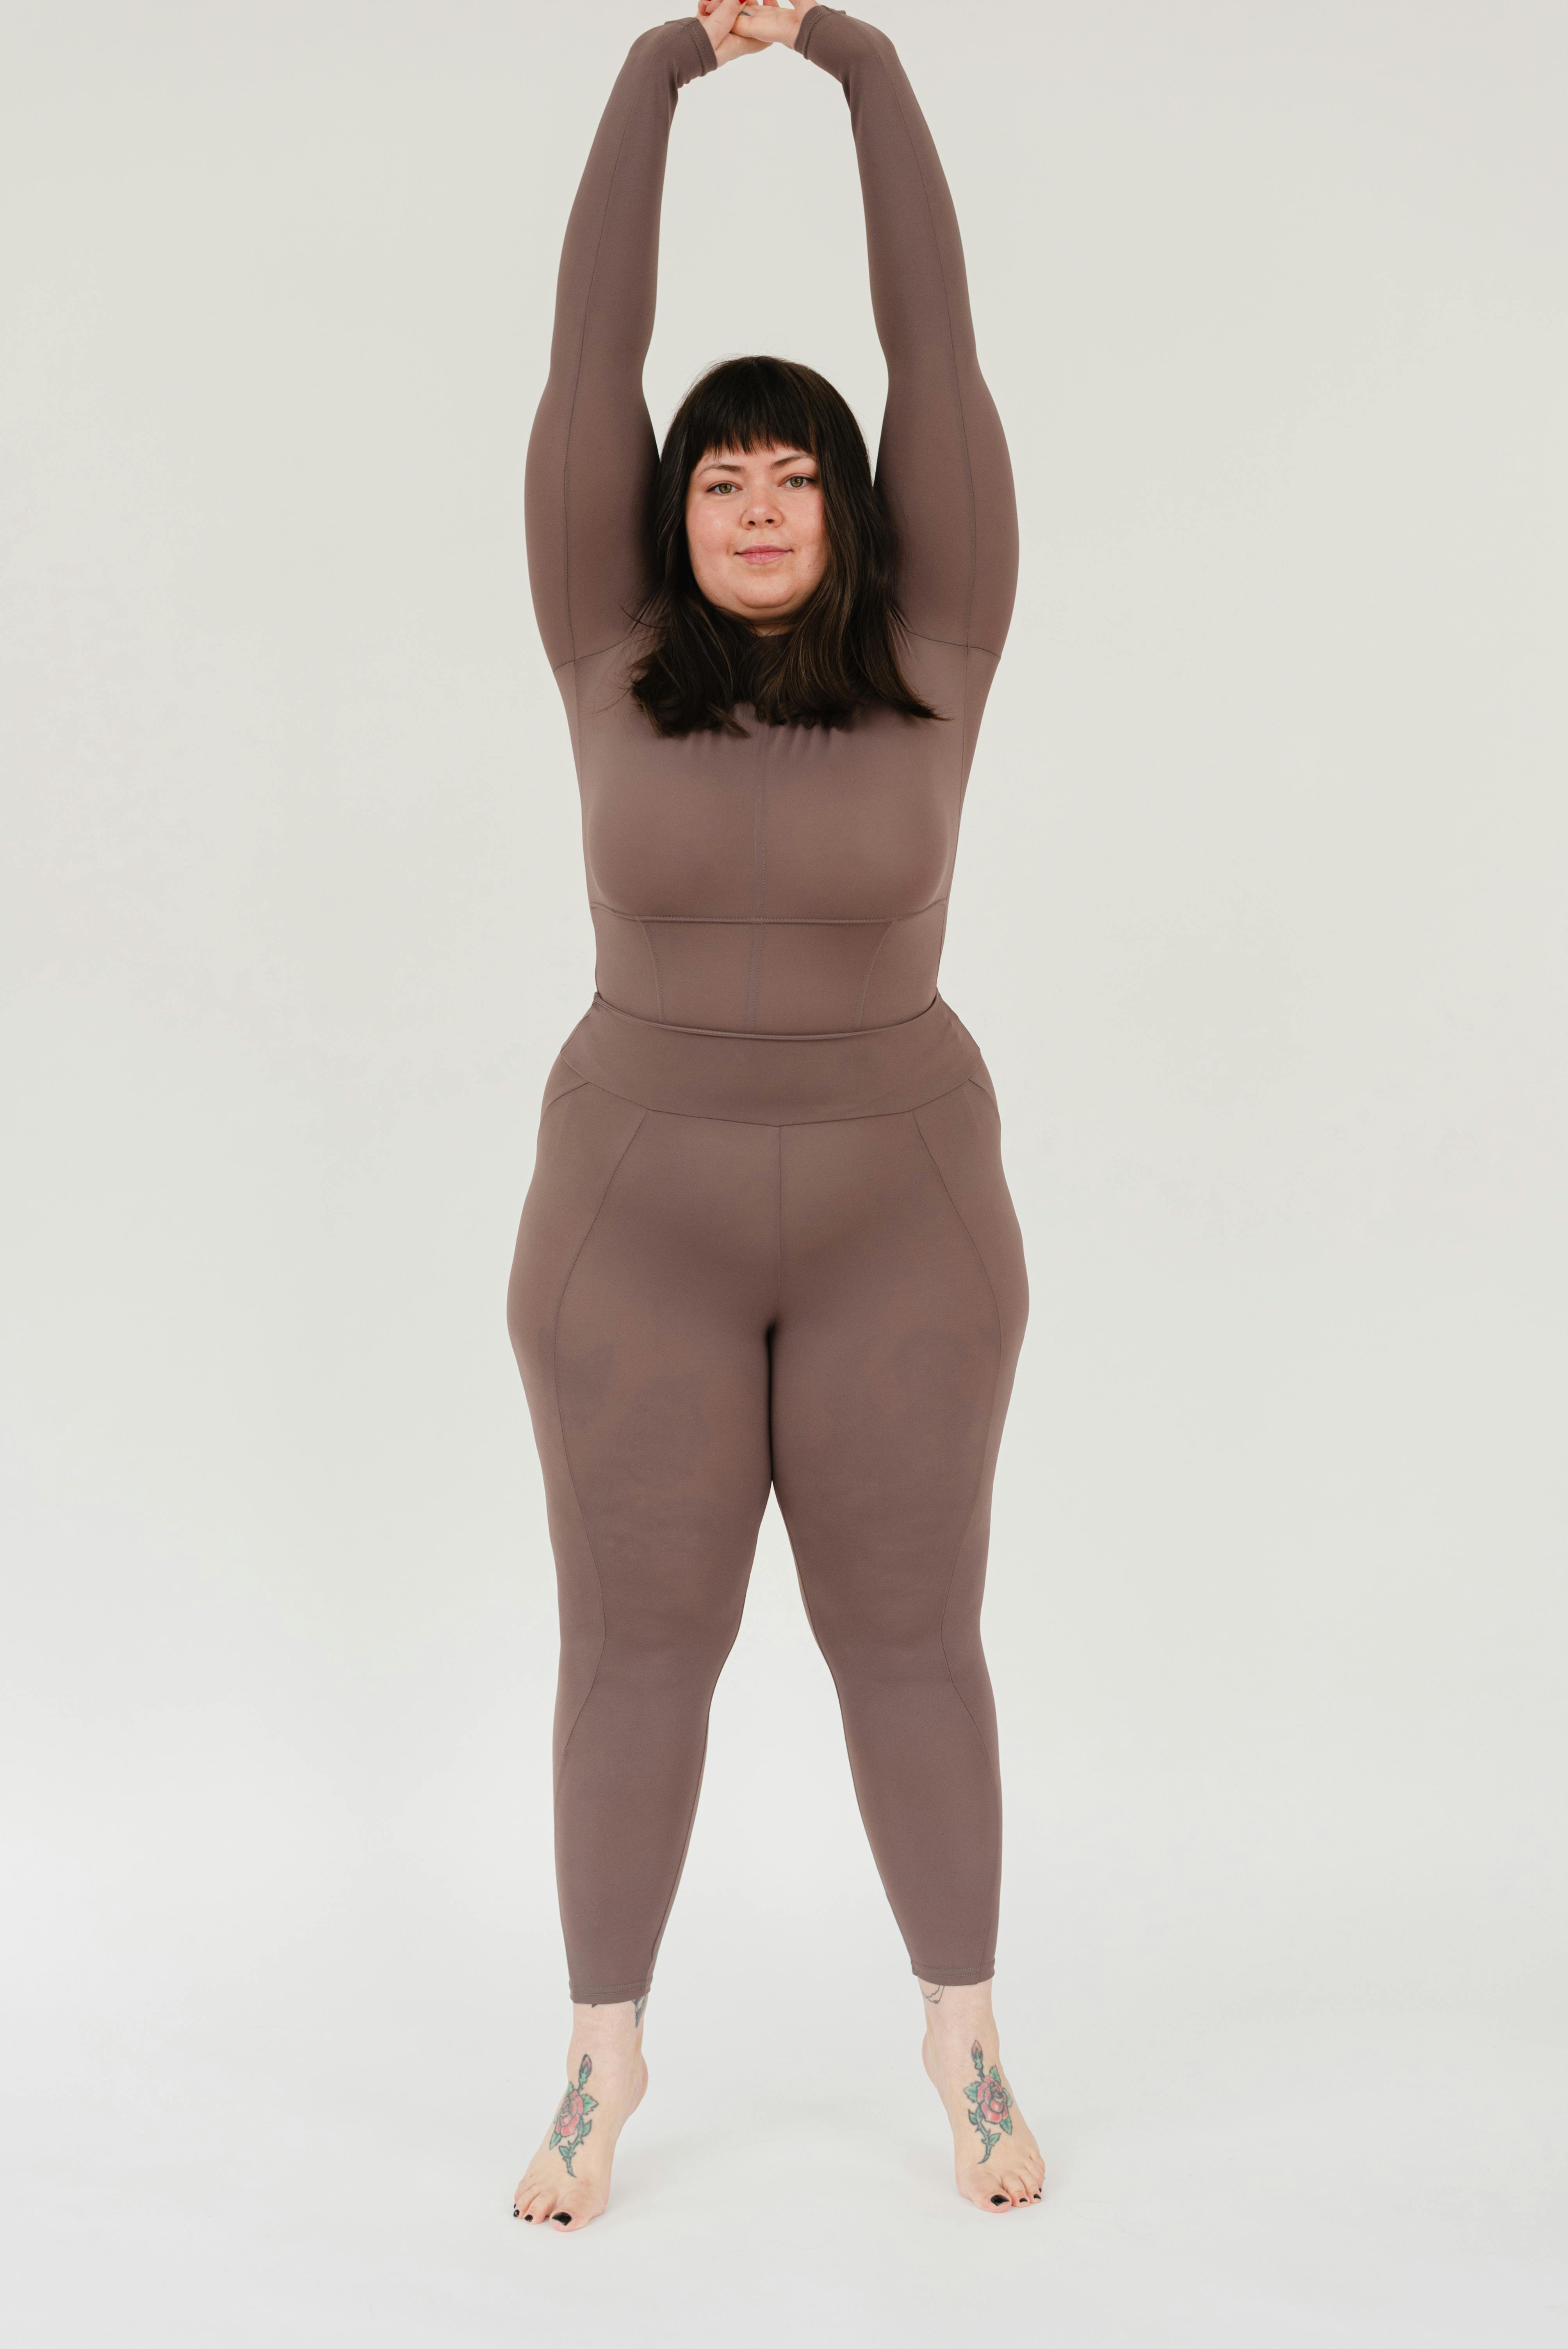 plus size woman stretching arms and looking at camera in white studio